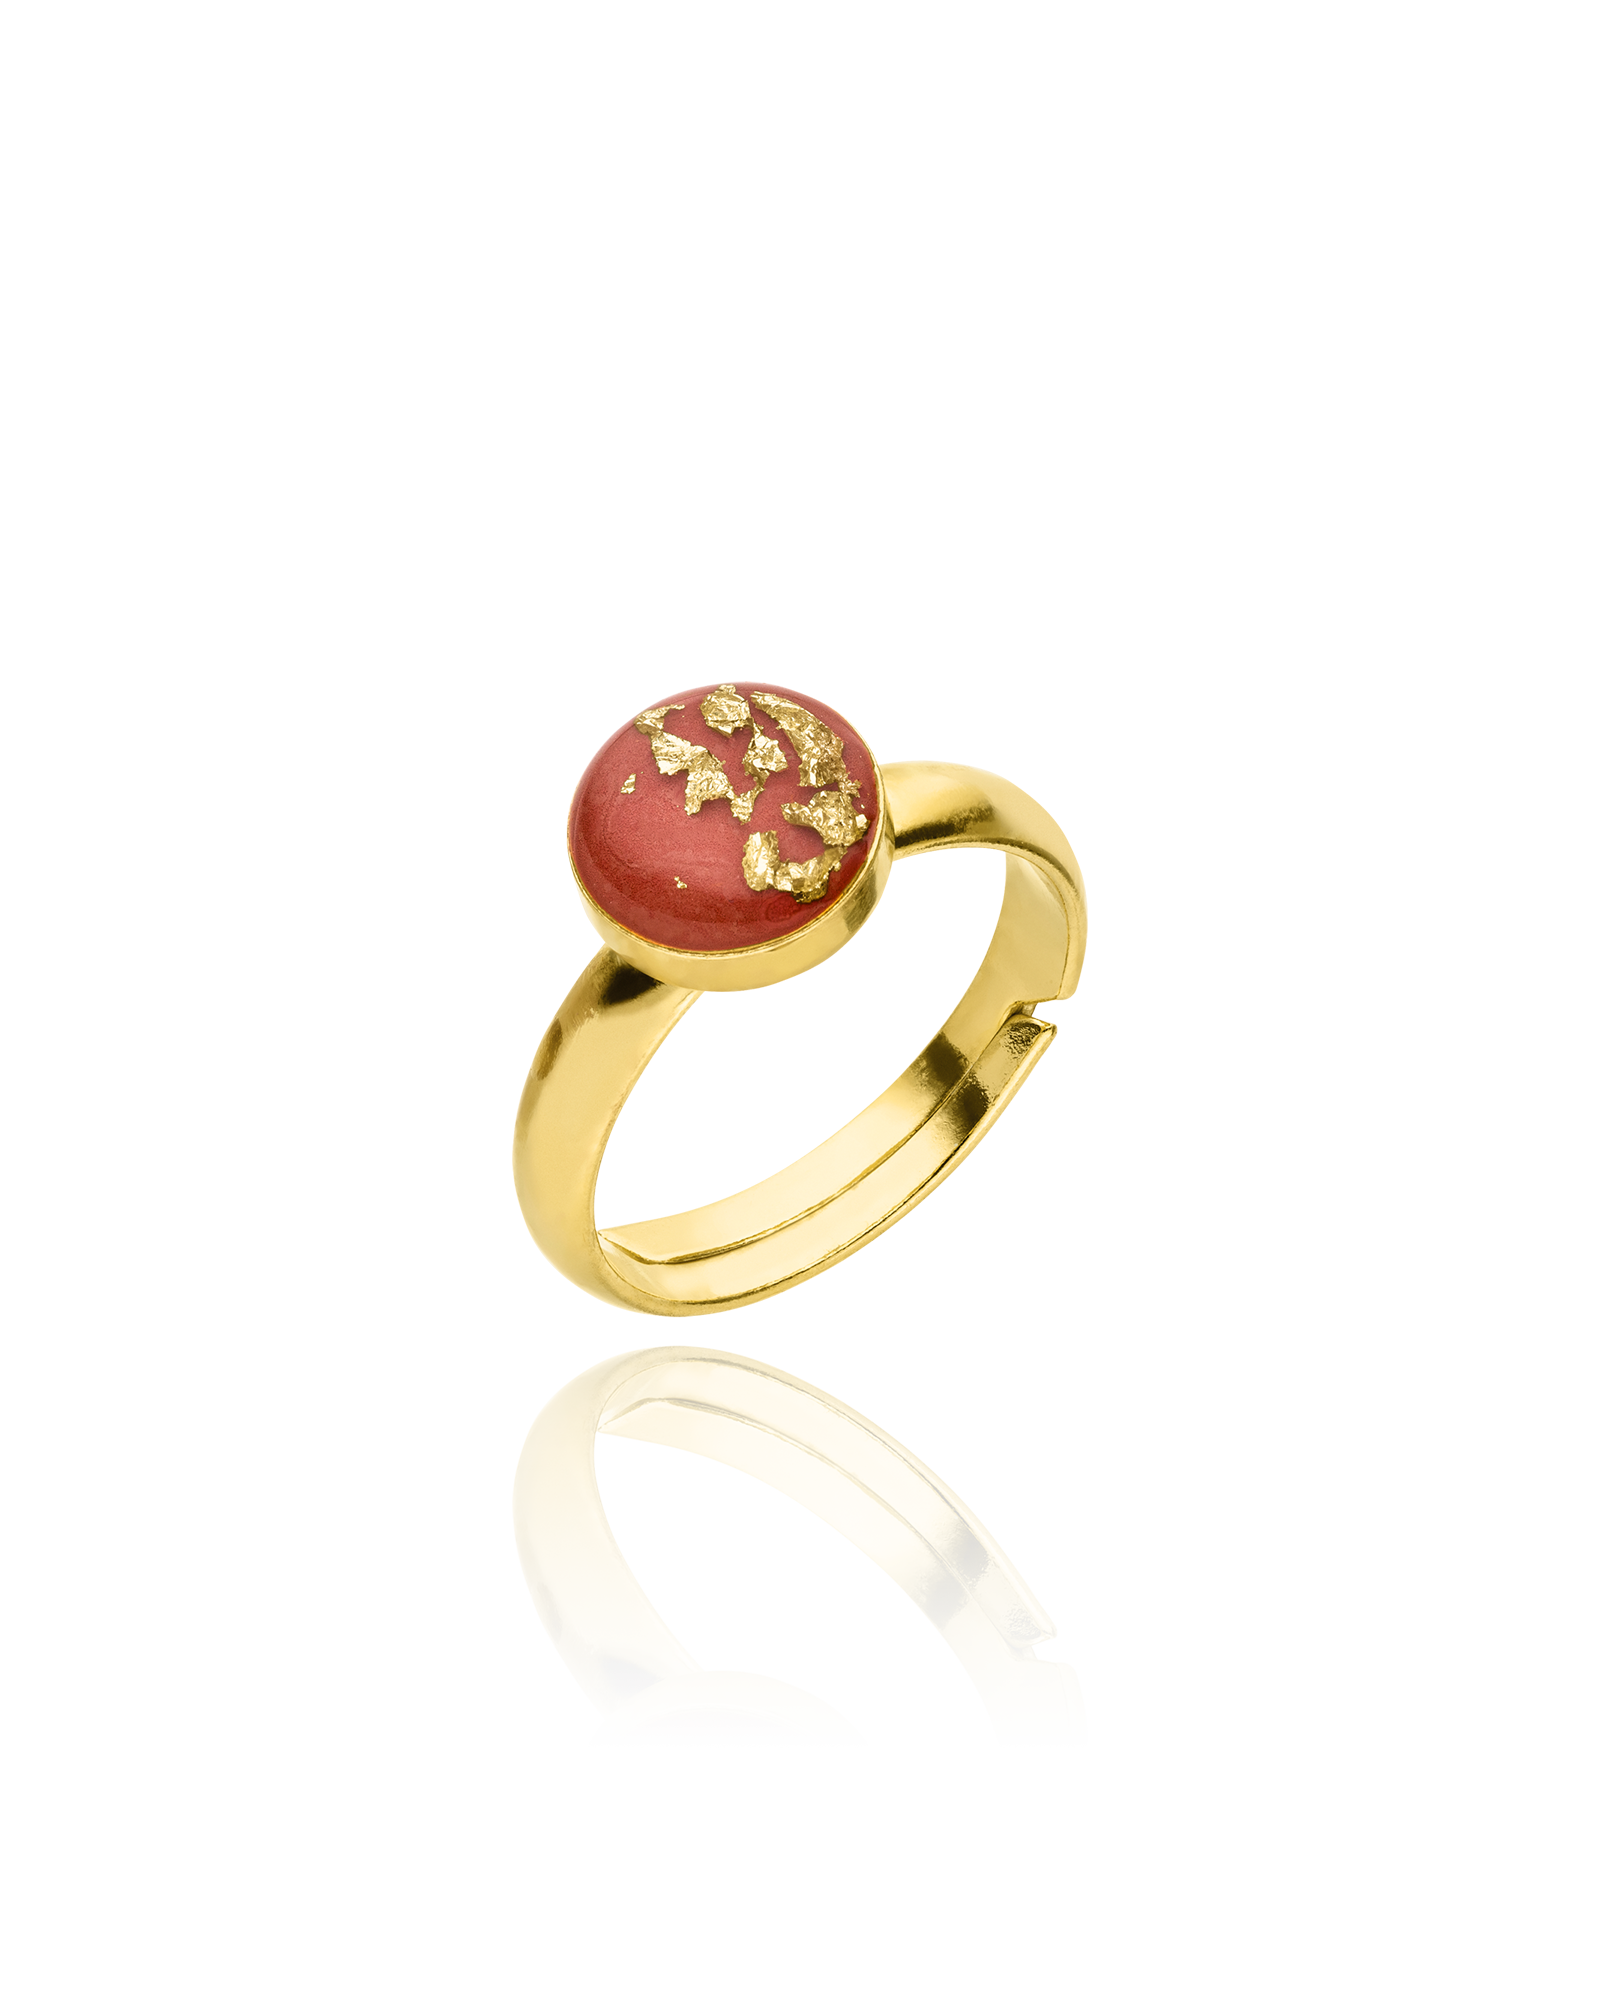 Ring Ruby Perfection